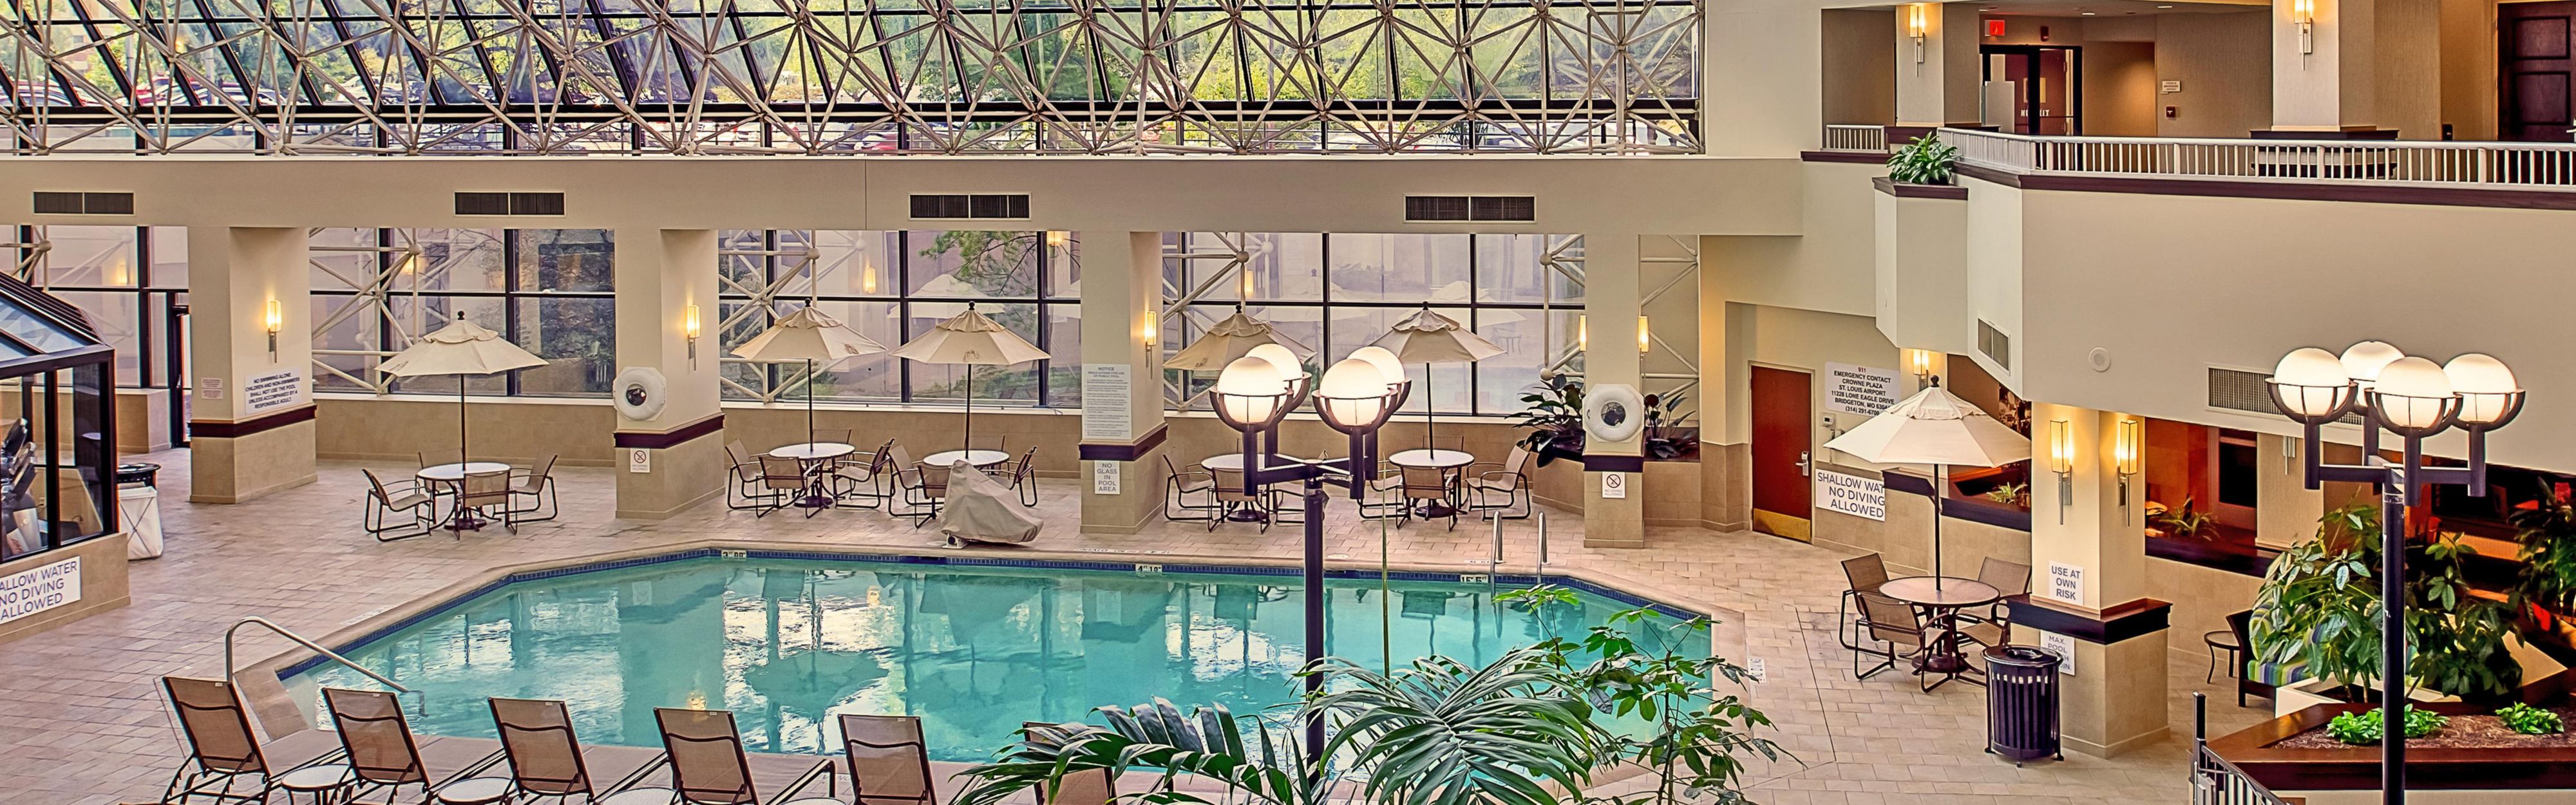 Our indoor pool gets you cozy and relaxed.